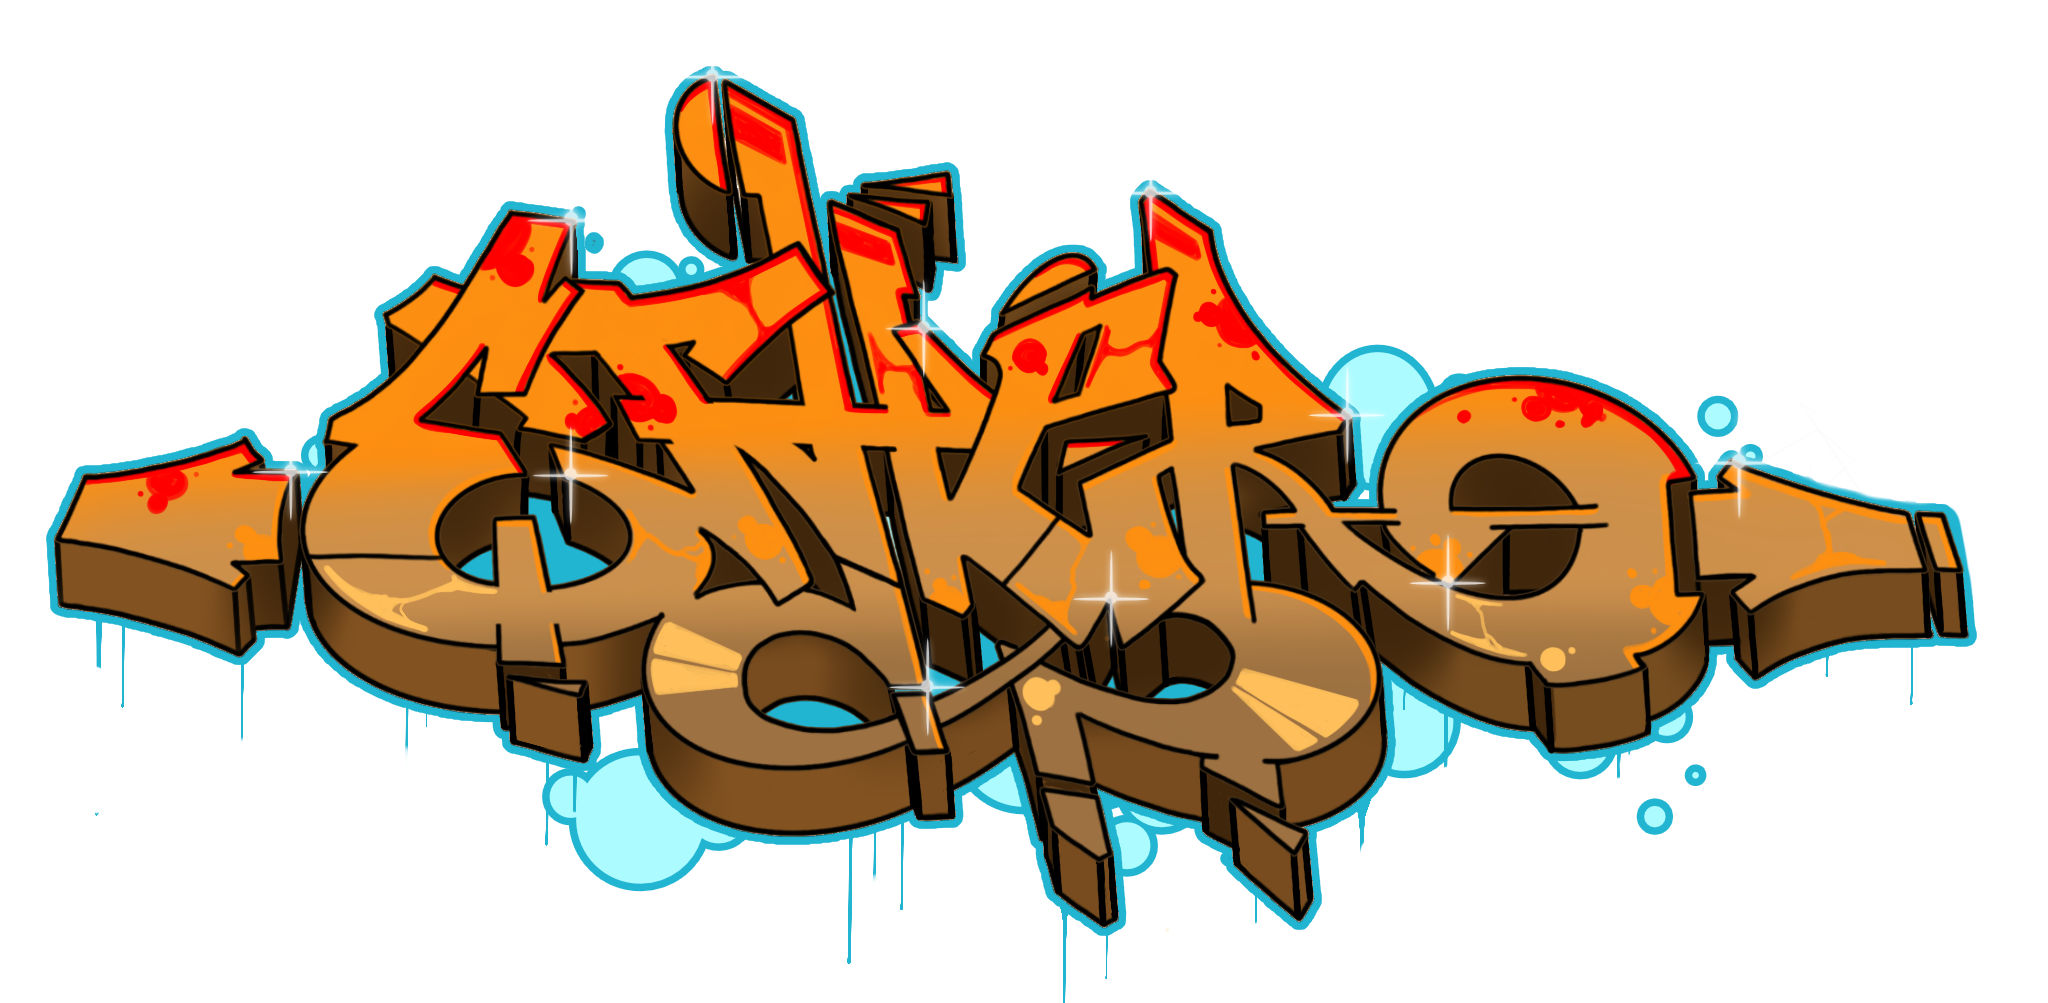 How to Draw “Ether” in Graffiti in 11 Steps